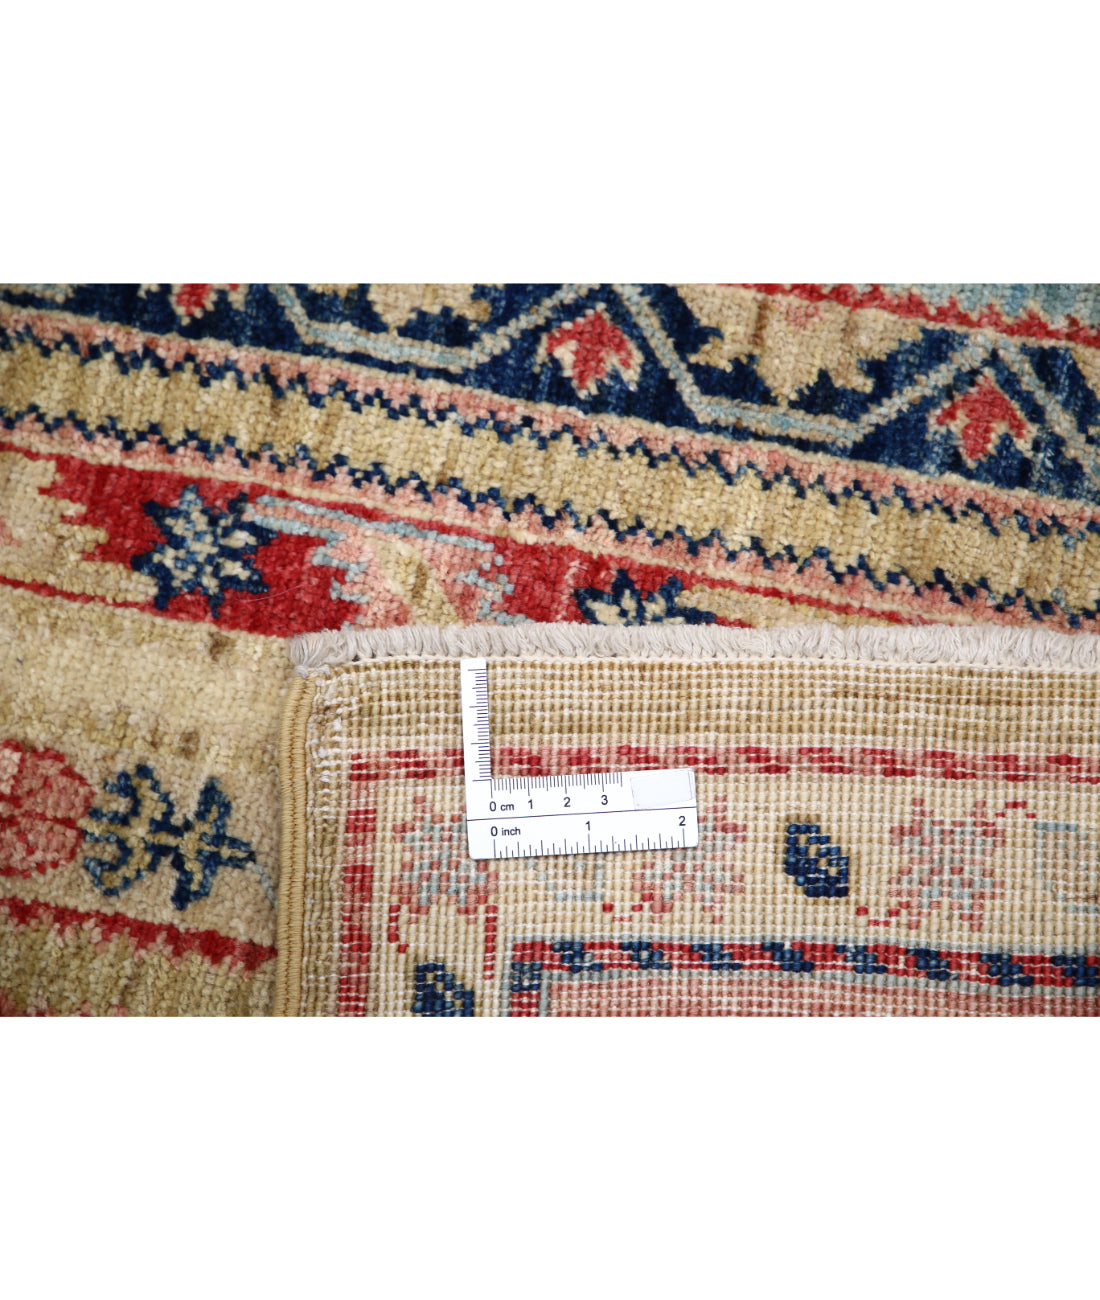 Hand Knotted Shaal Wool Rug - 4'10'' x 6'7'' 4'10'' x 6'7'' (145 X 198) / Multi / Multi